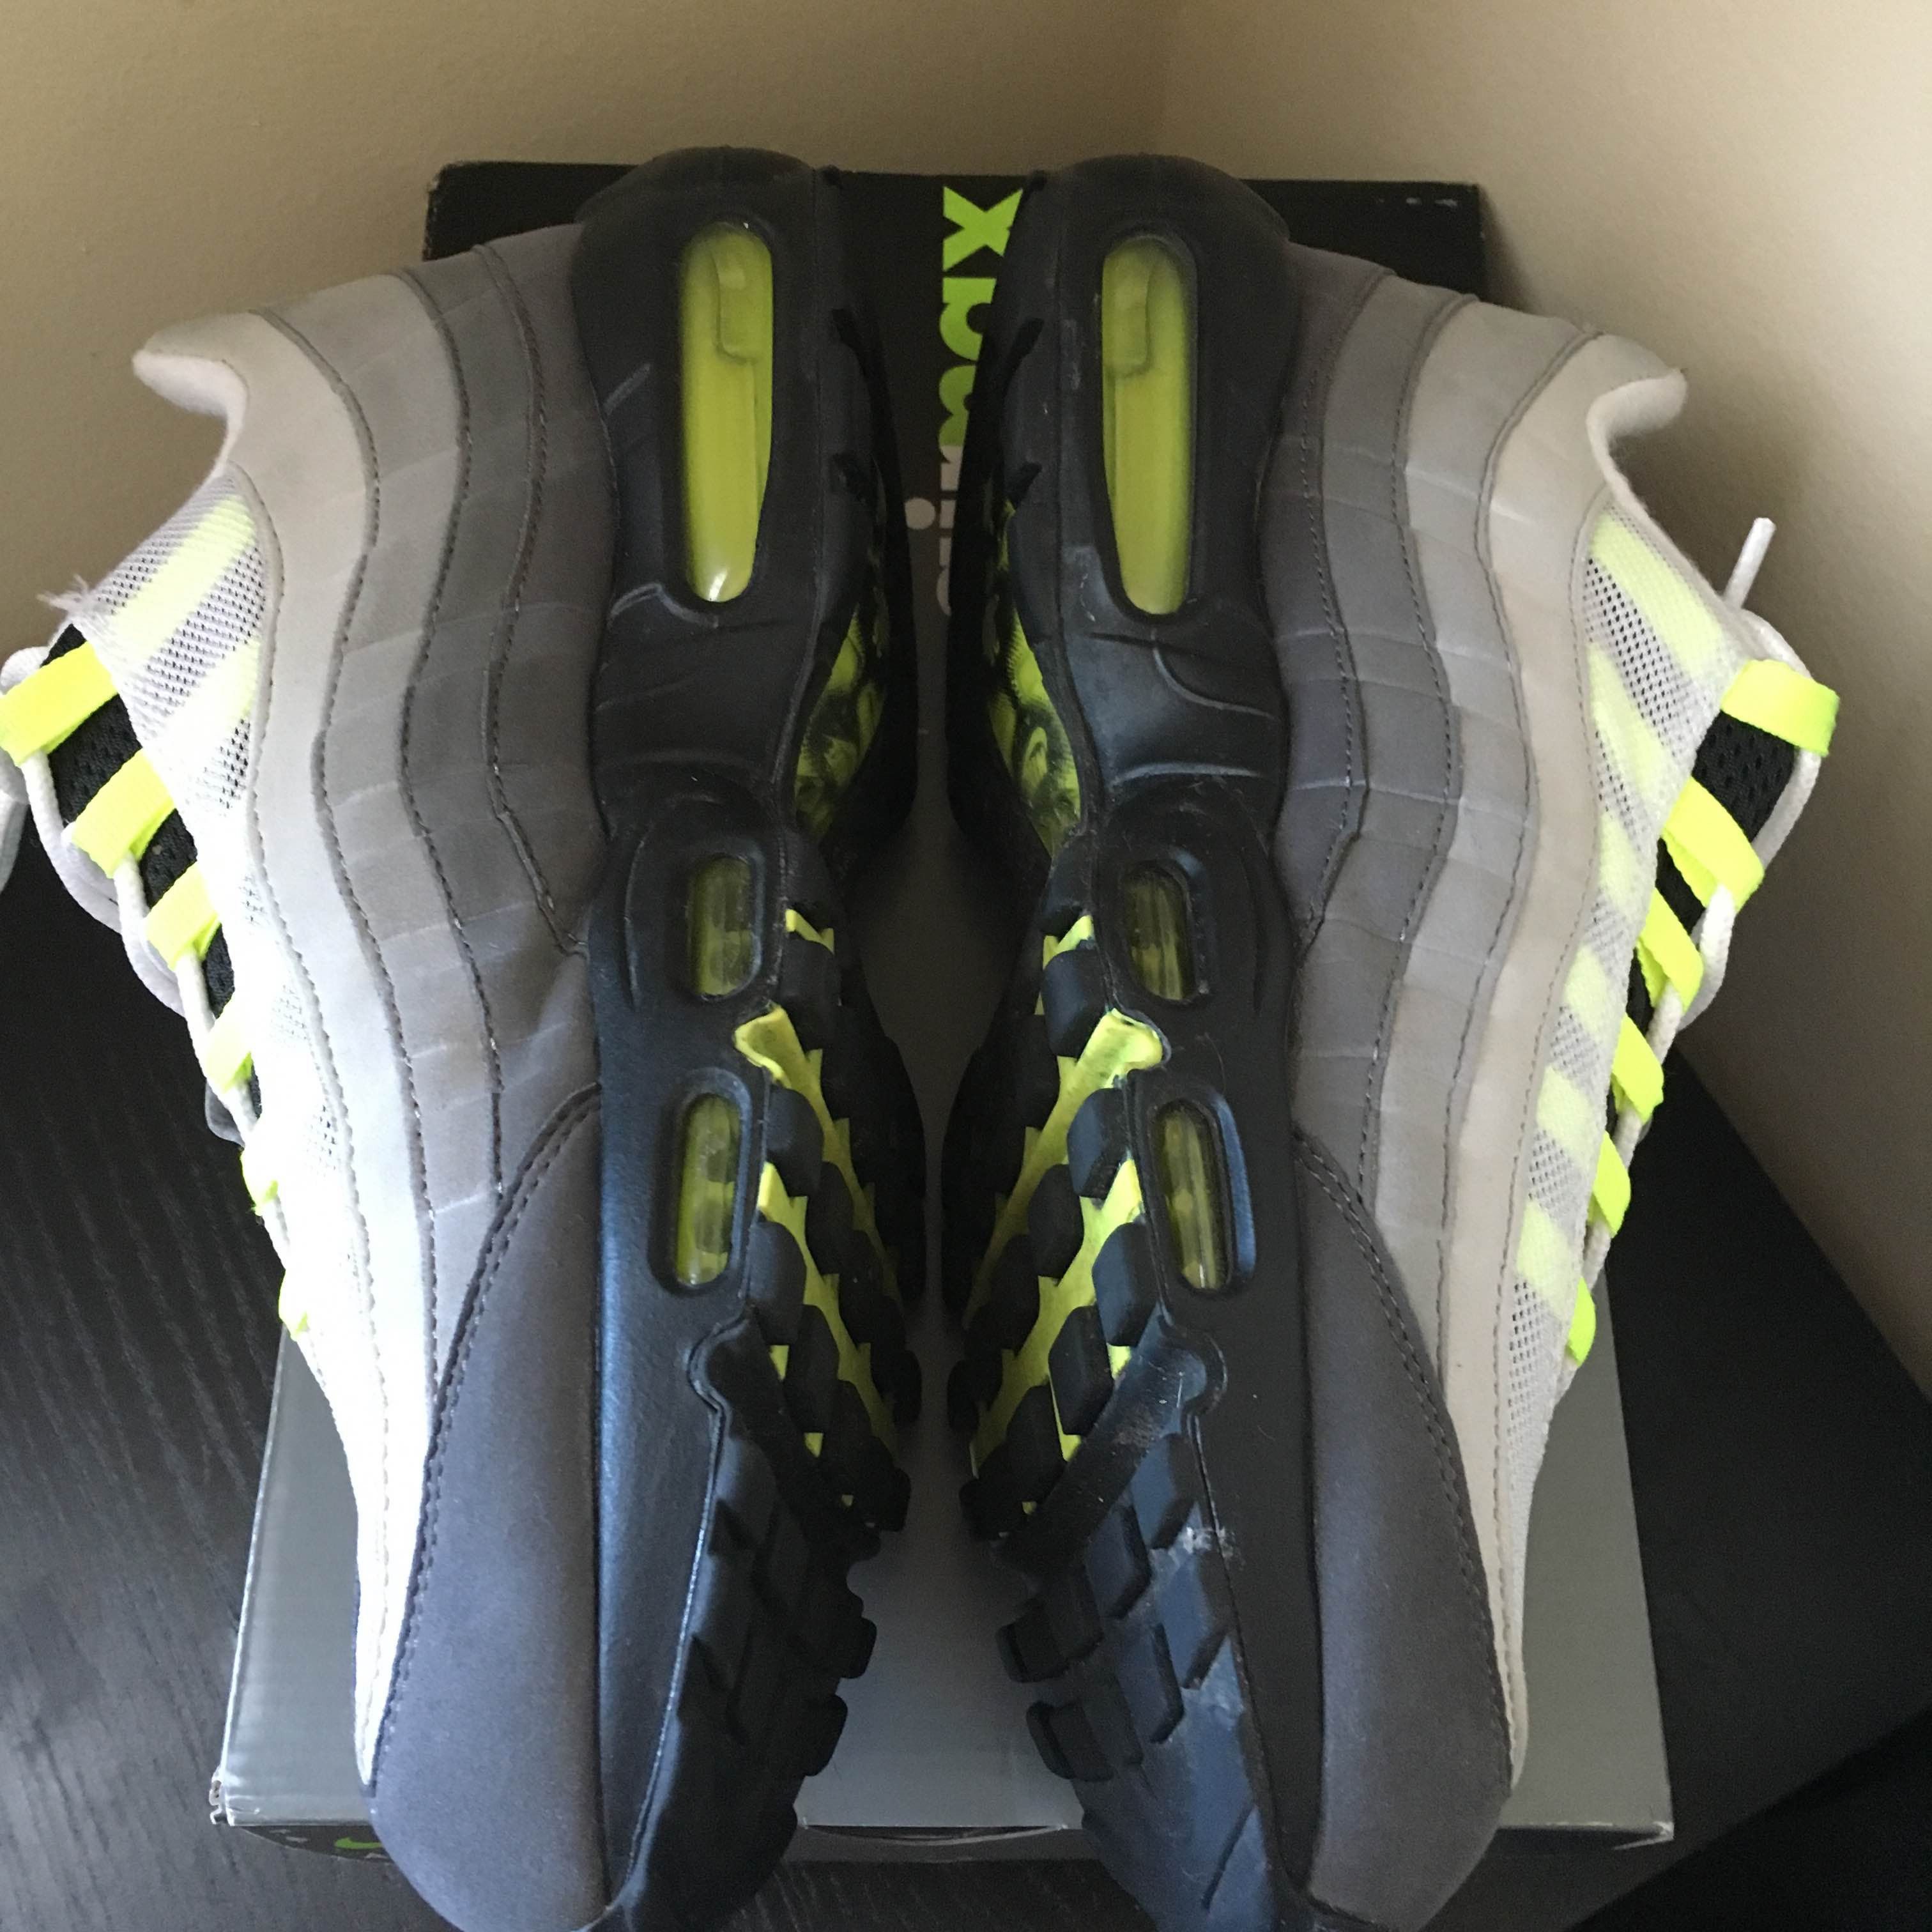 Nike Air Max 95 OG Neon 2015 Size US 10.5 / EU 43-44 - 2 Preview